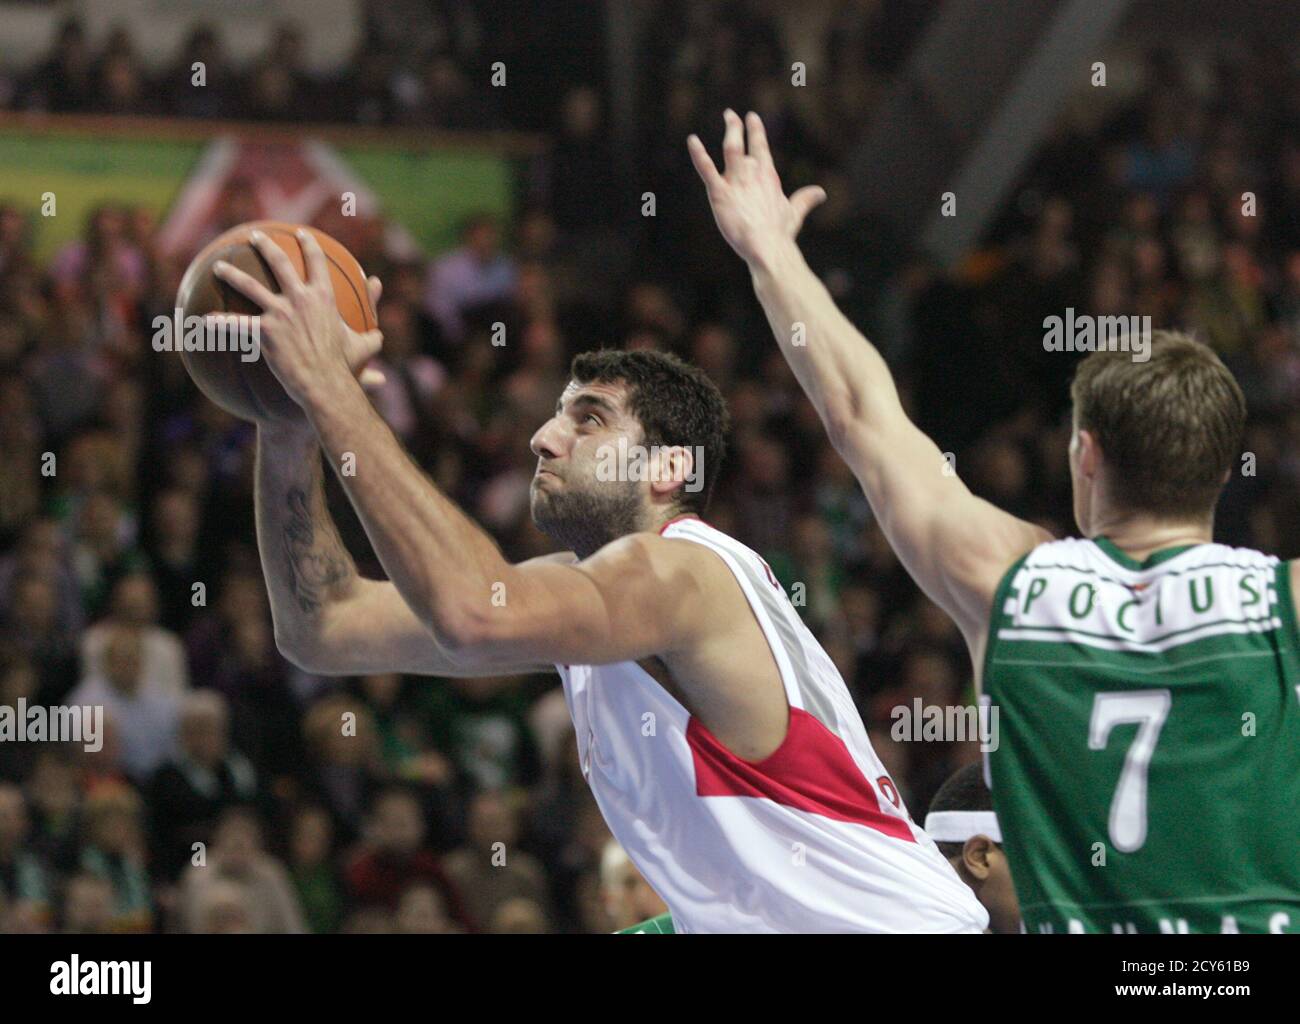 Ioannis Bourousis of Olympiacos (L) goes for basket past Martynas Pocius of  Zalgiris during their Euroleague